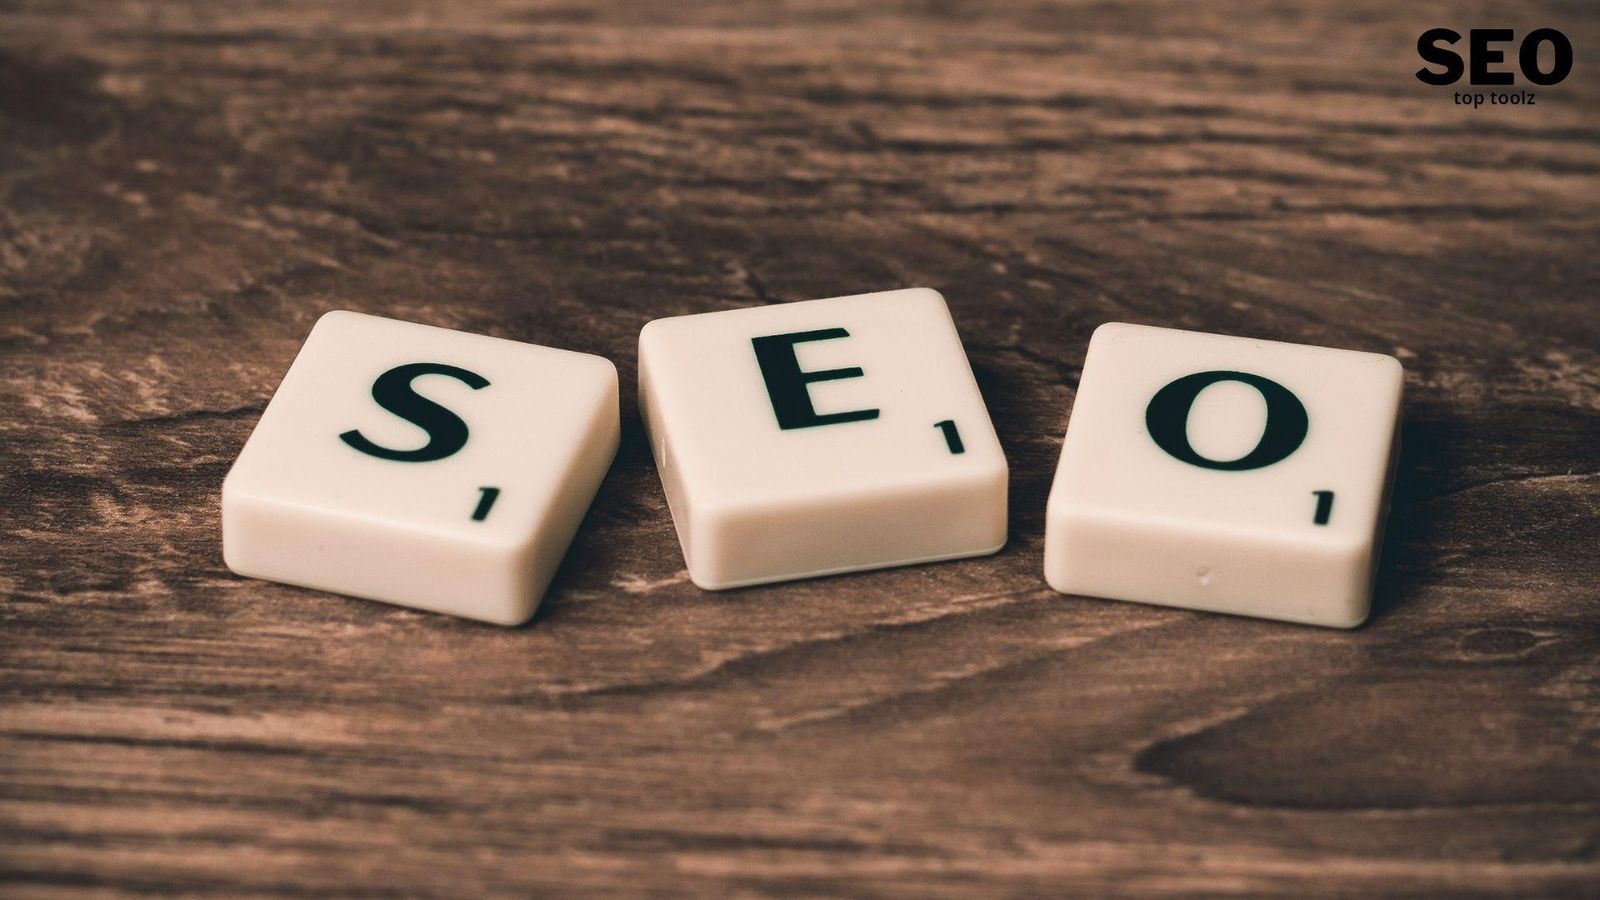 5 Tips for Finding Best Local SEO Services for Small Businesses in 2022, affordable local seo services, affordable seo services for small businesses, best seo companies for small business, how to improve local seo, local seo checklist, local seo google my business, local seo strategy 2022, ocal seo strategy 2022, small business seo services, why is local seo important